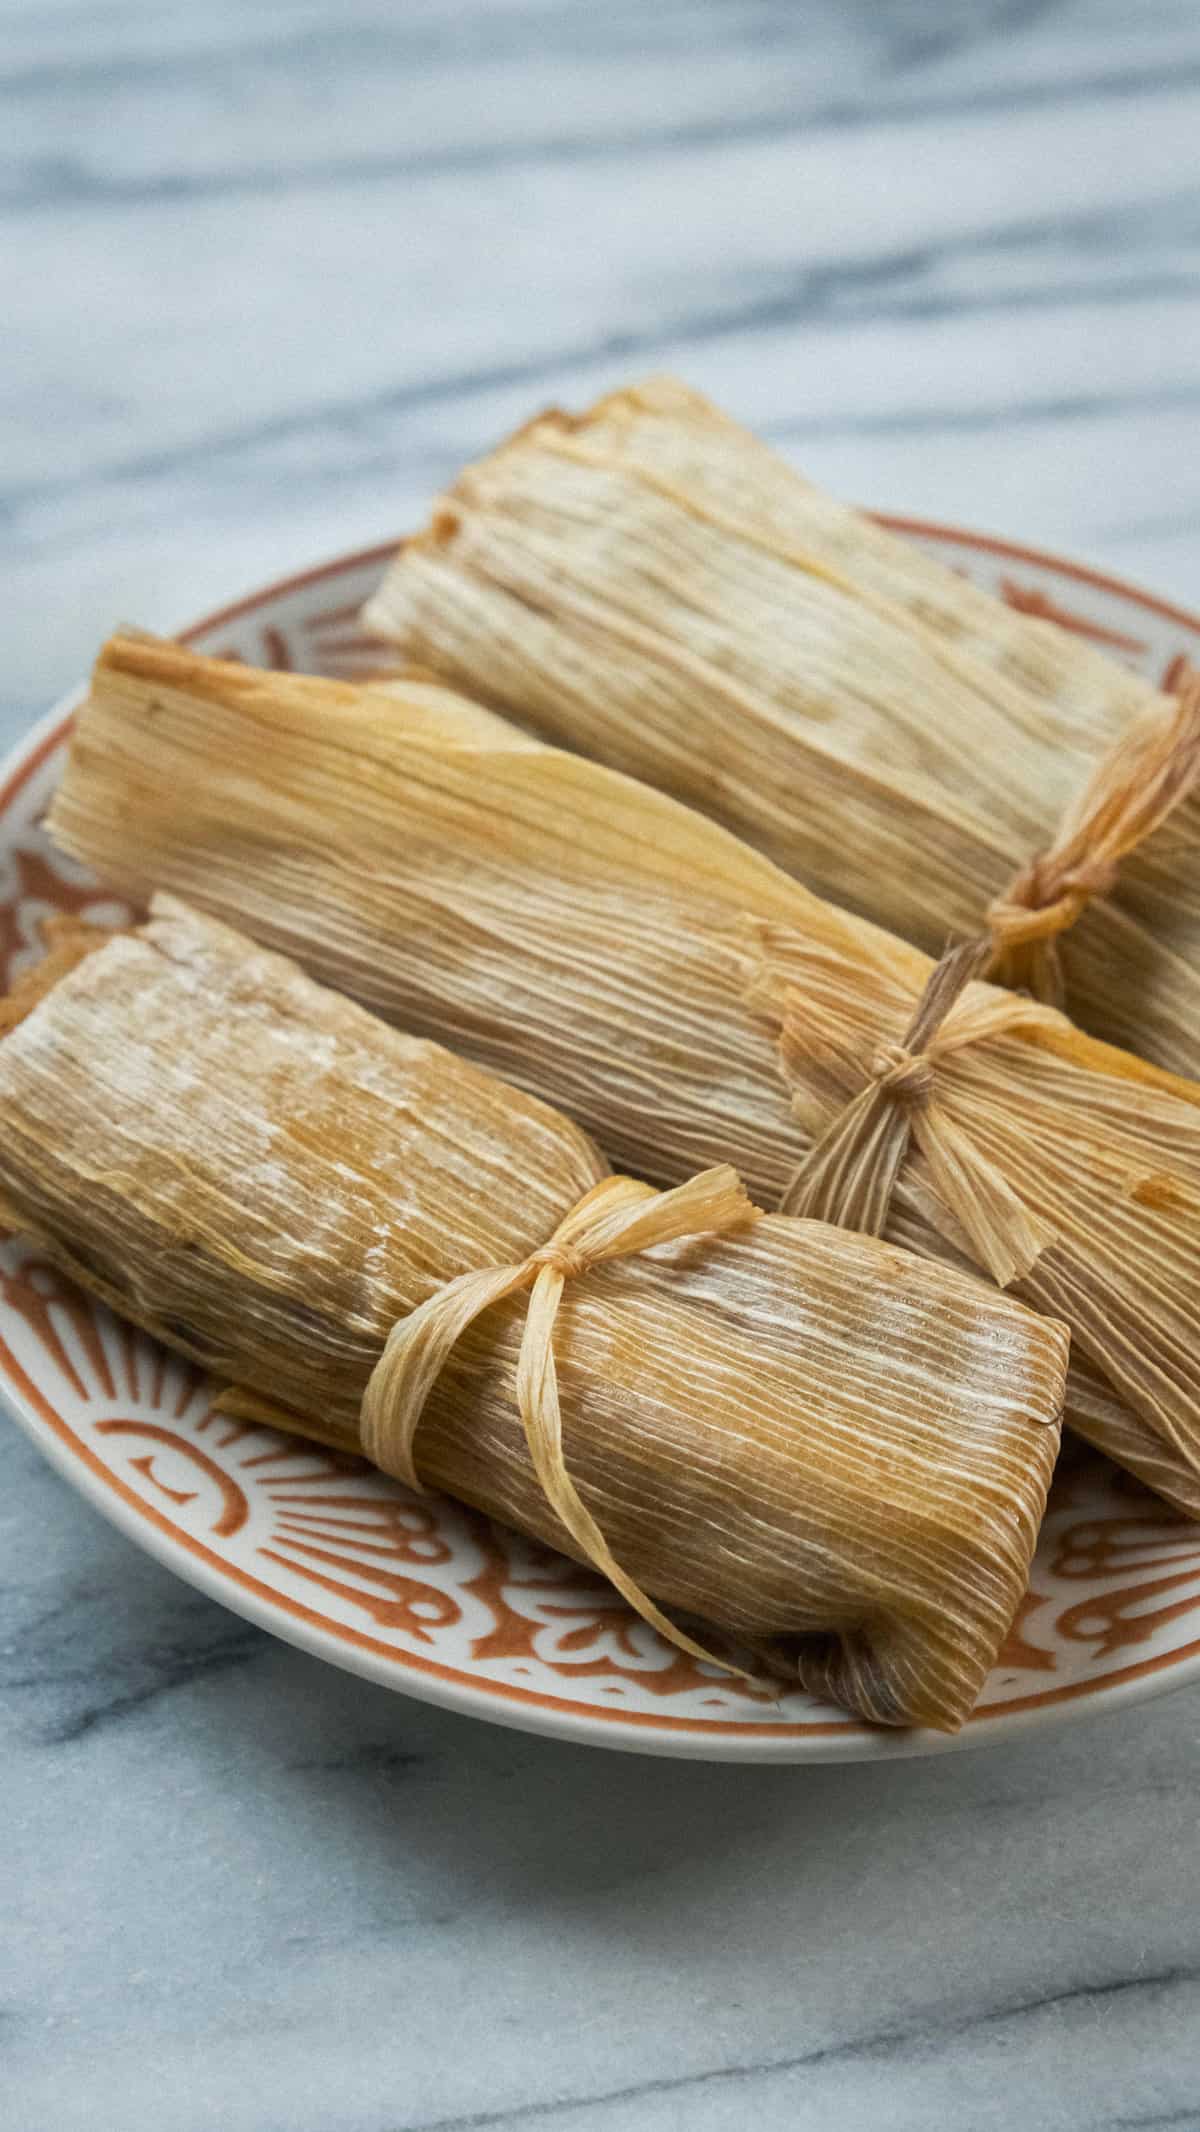 Meat in tamales